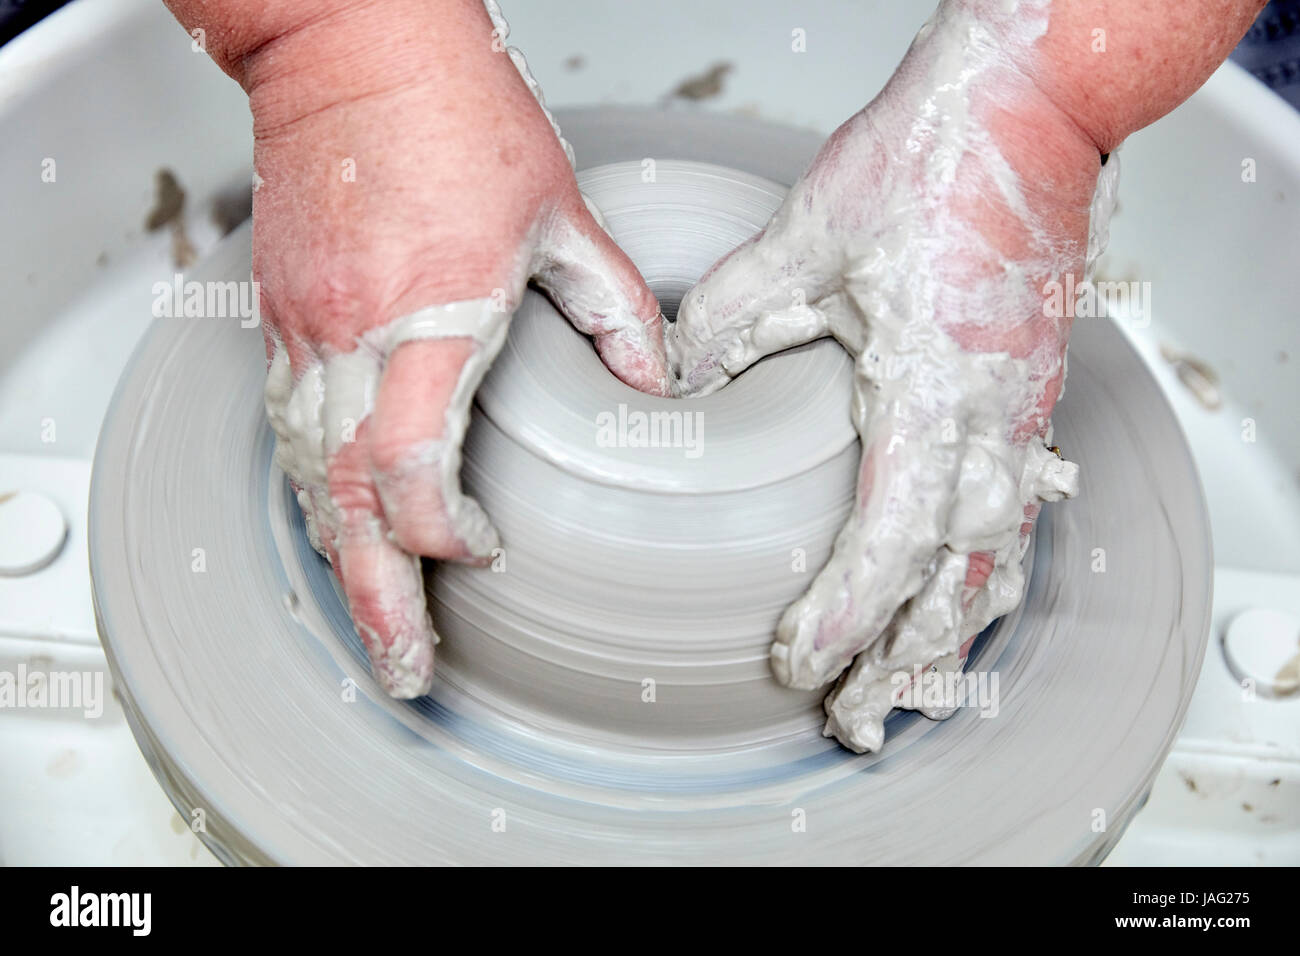 A person using a potter's wheel, throwing a clay pot and using thumbs to shape the wet clay. Seen from above. Stock Photo